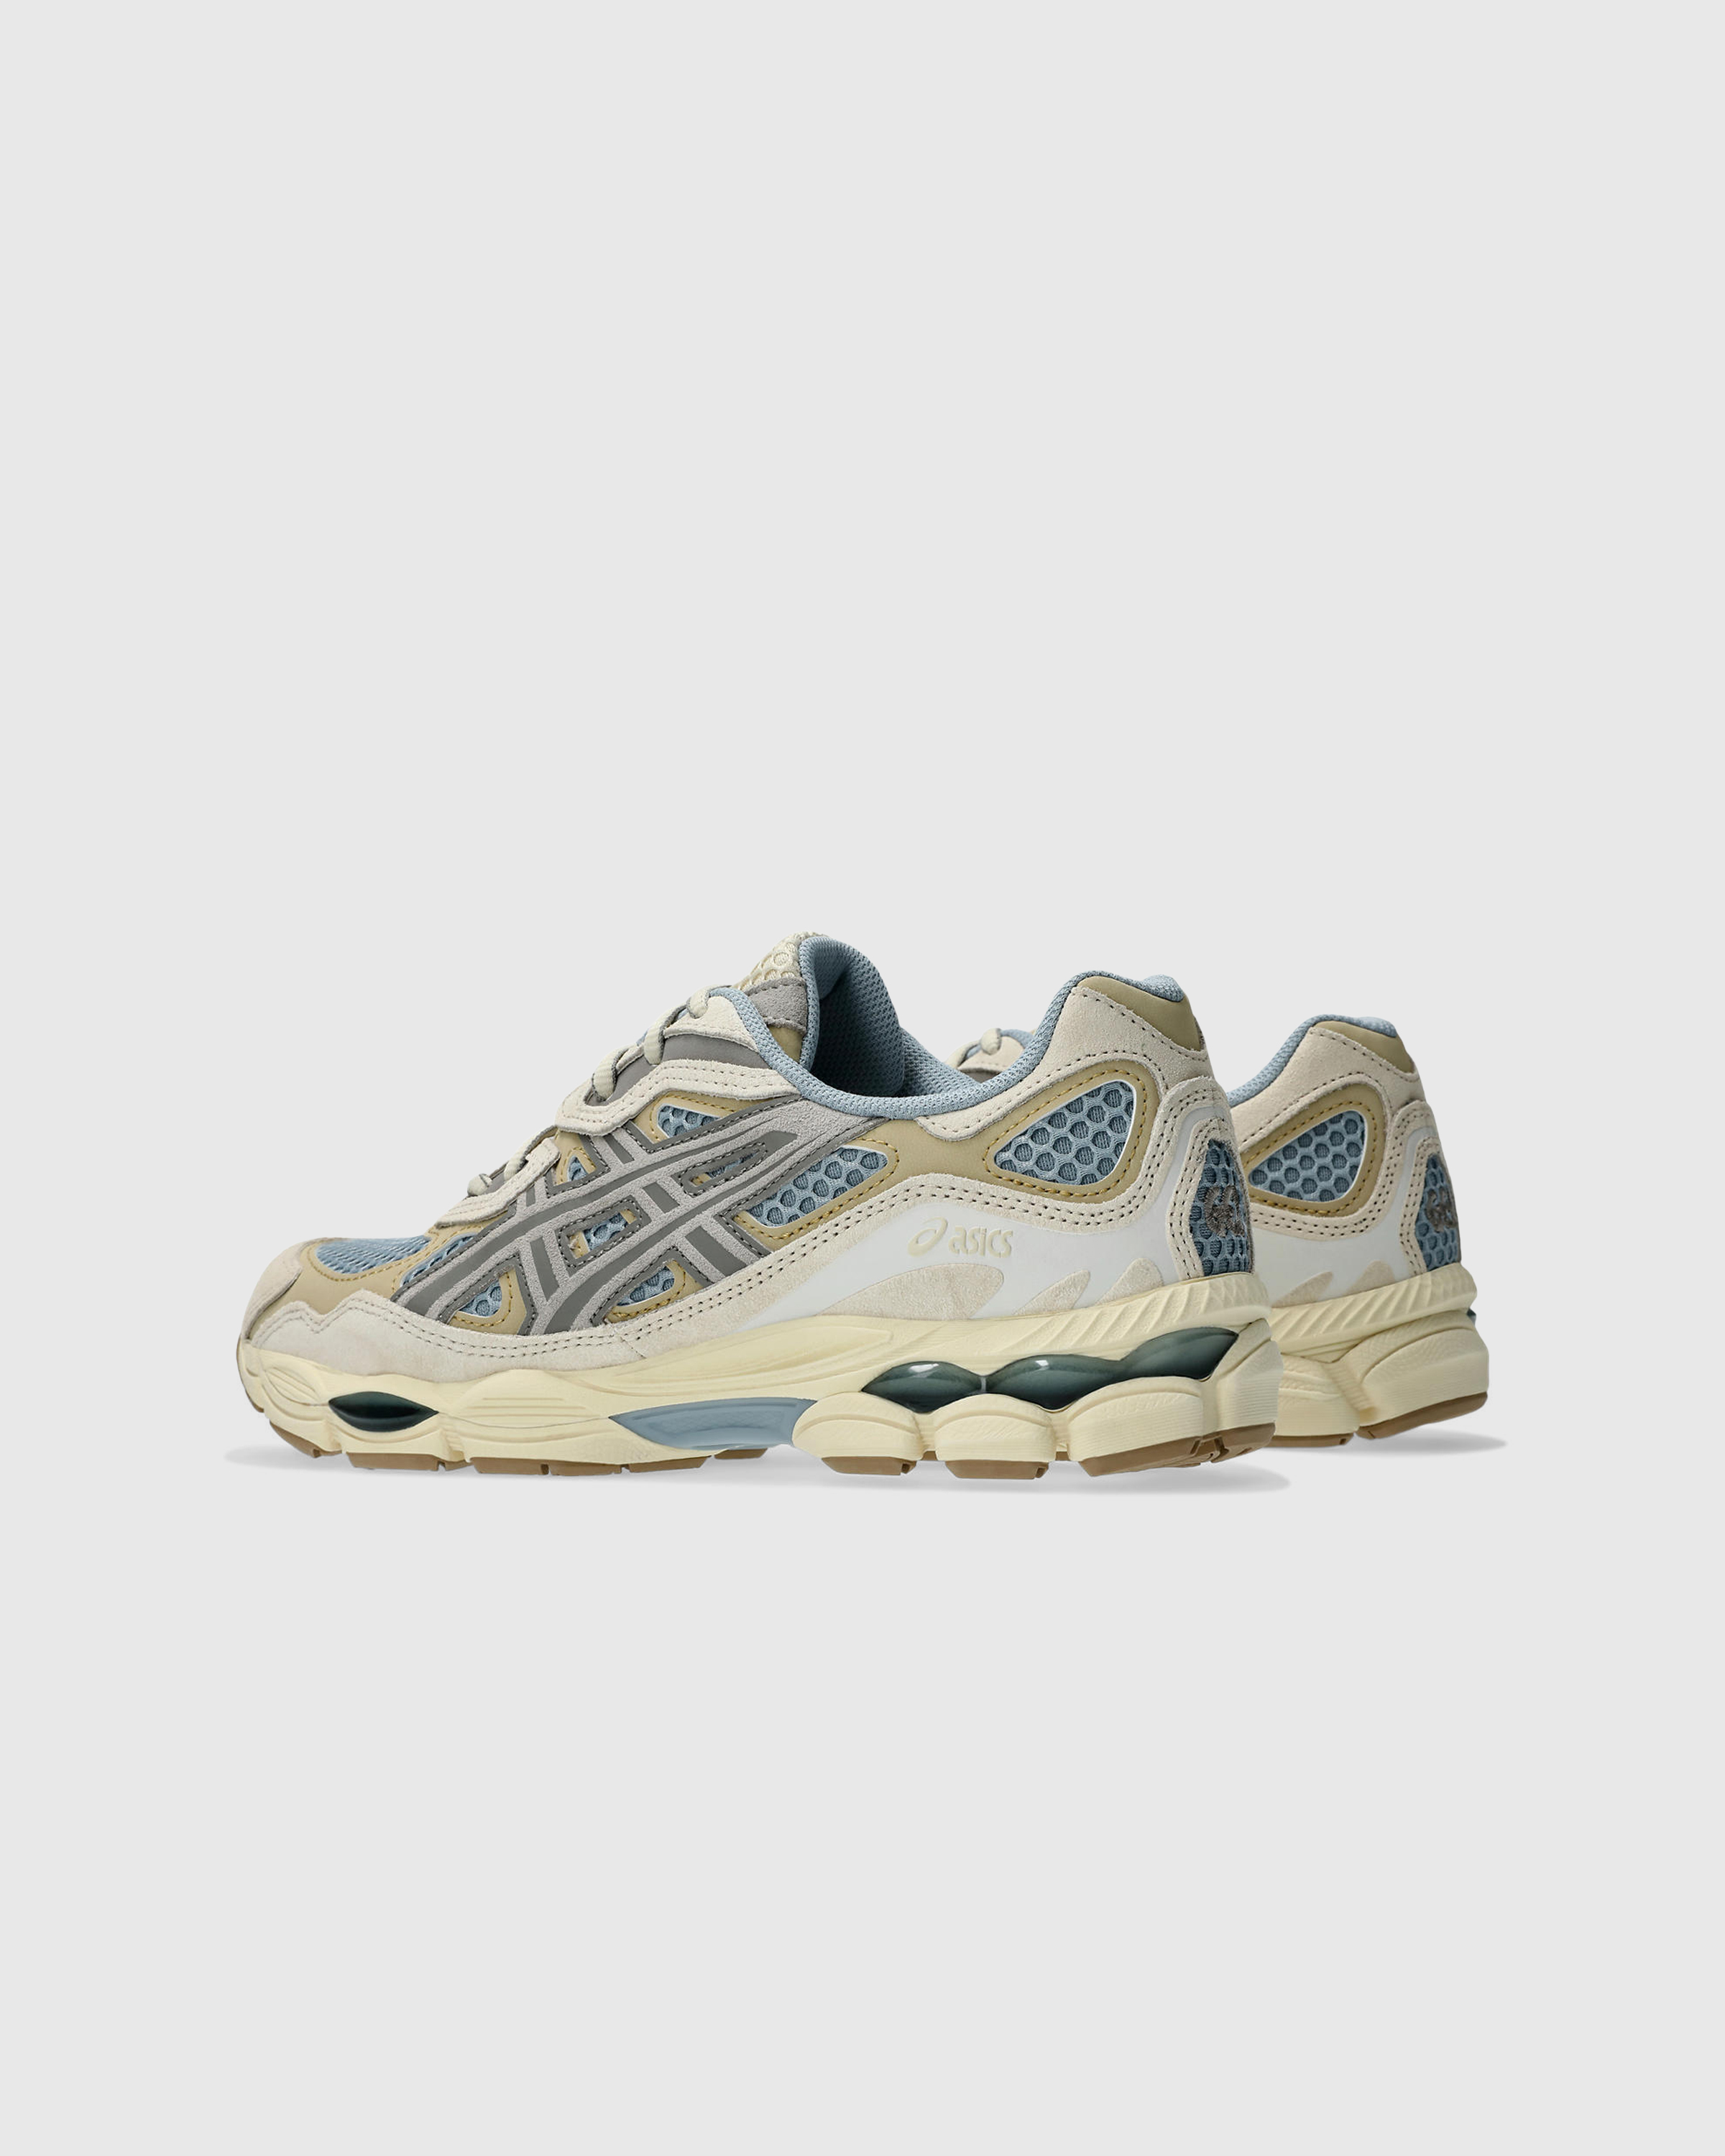 asics – GEL-NYC Dolphin Grey/Oyster Grey - Low Top Sneakers - Grey - Image 4